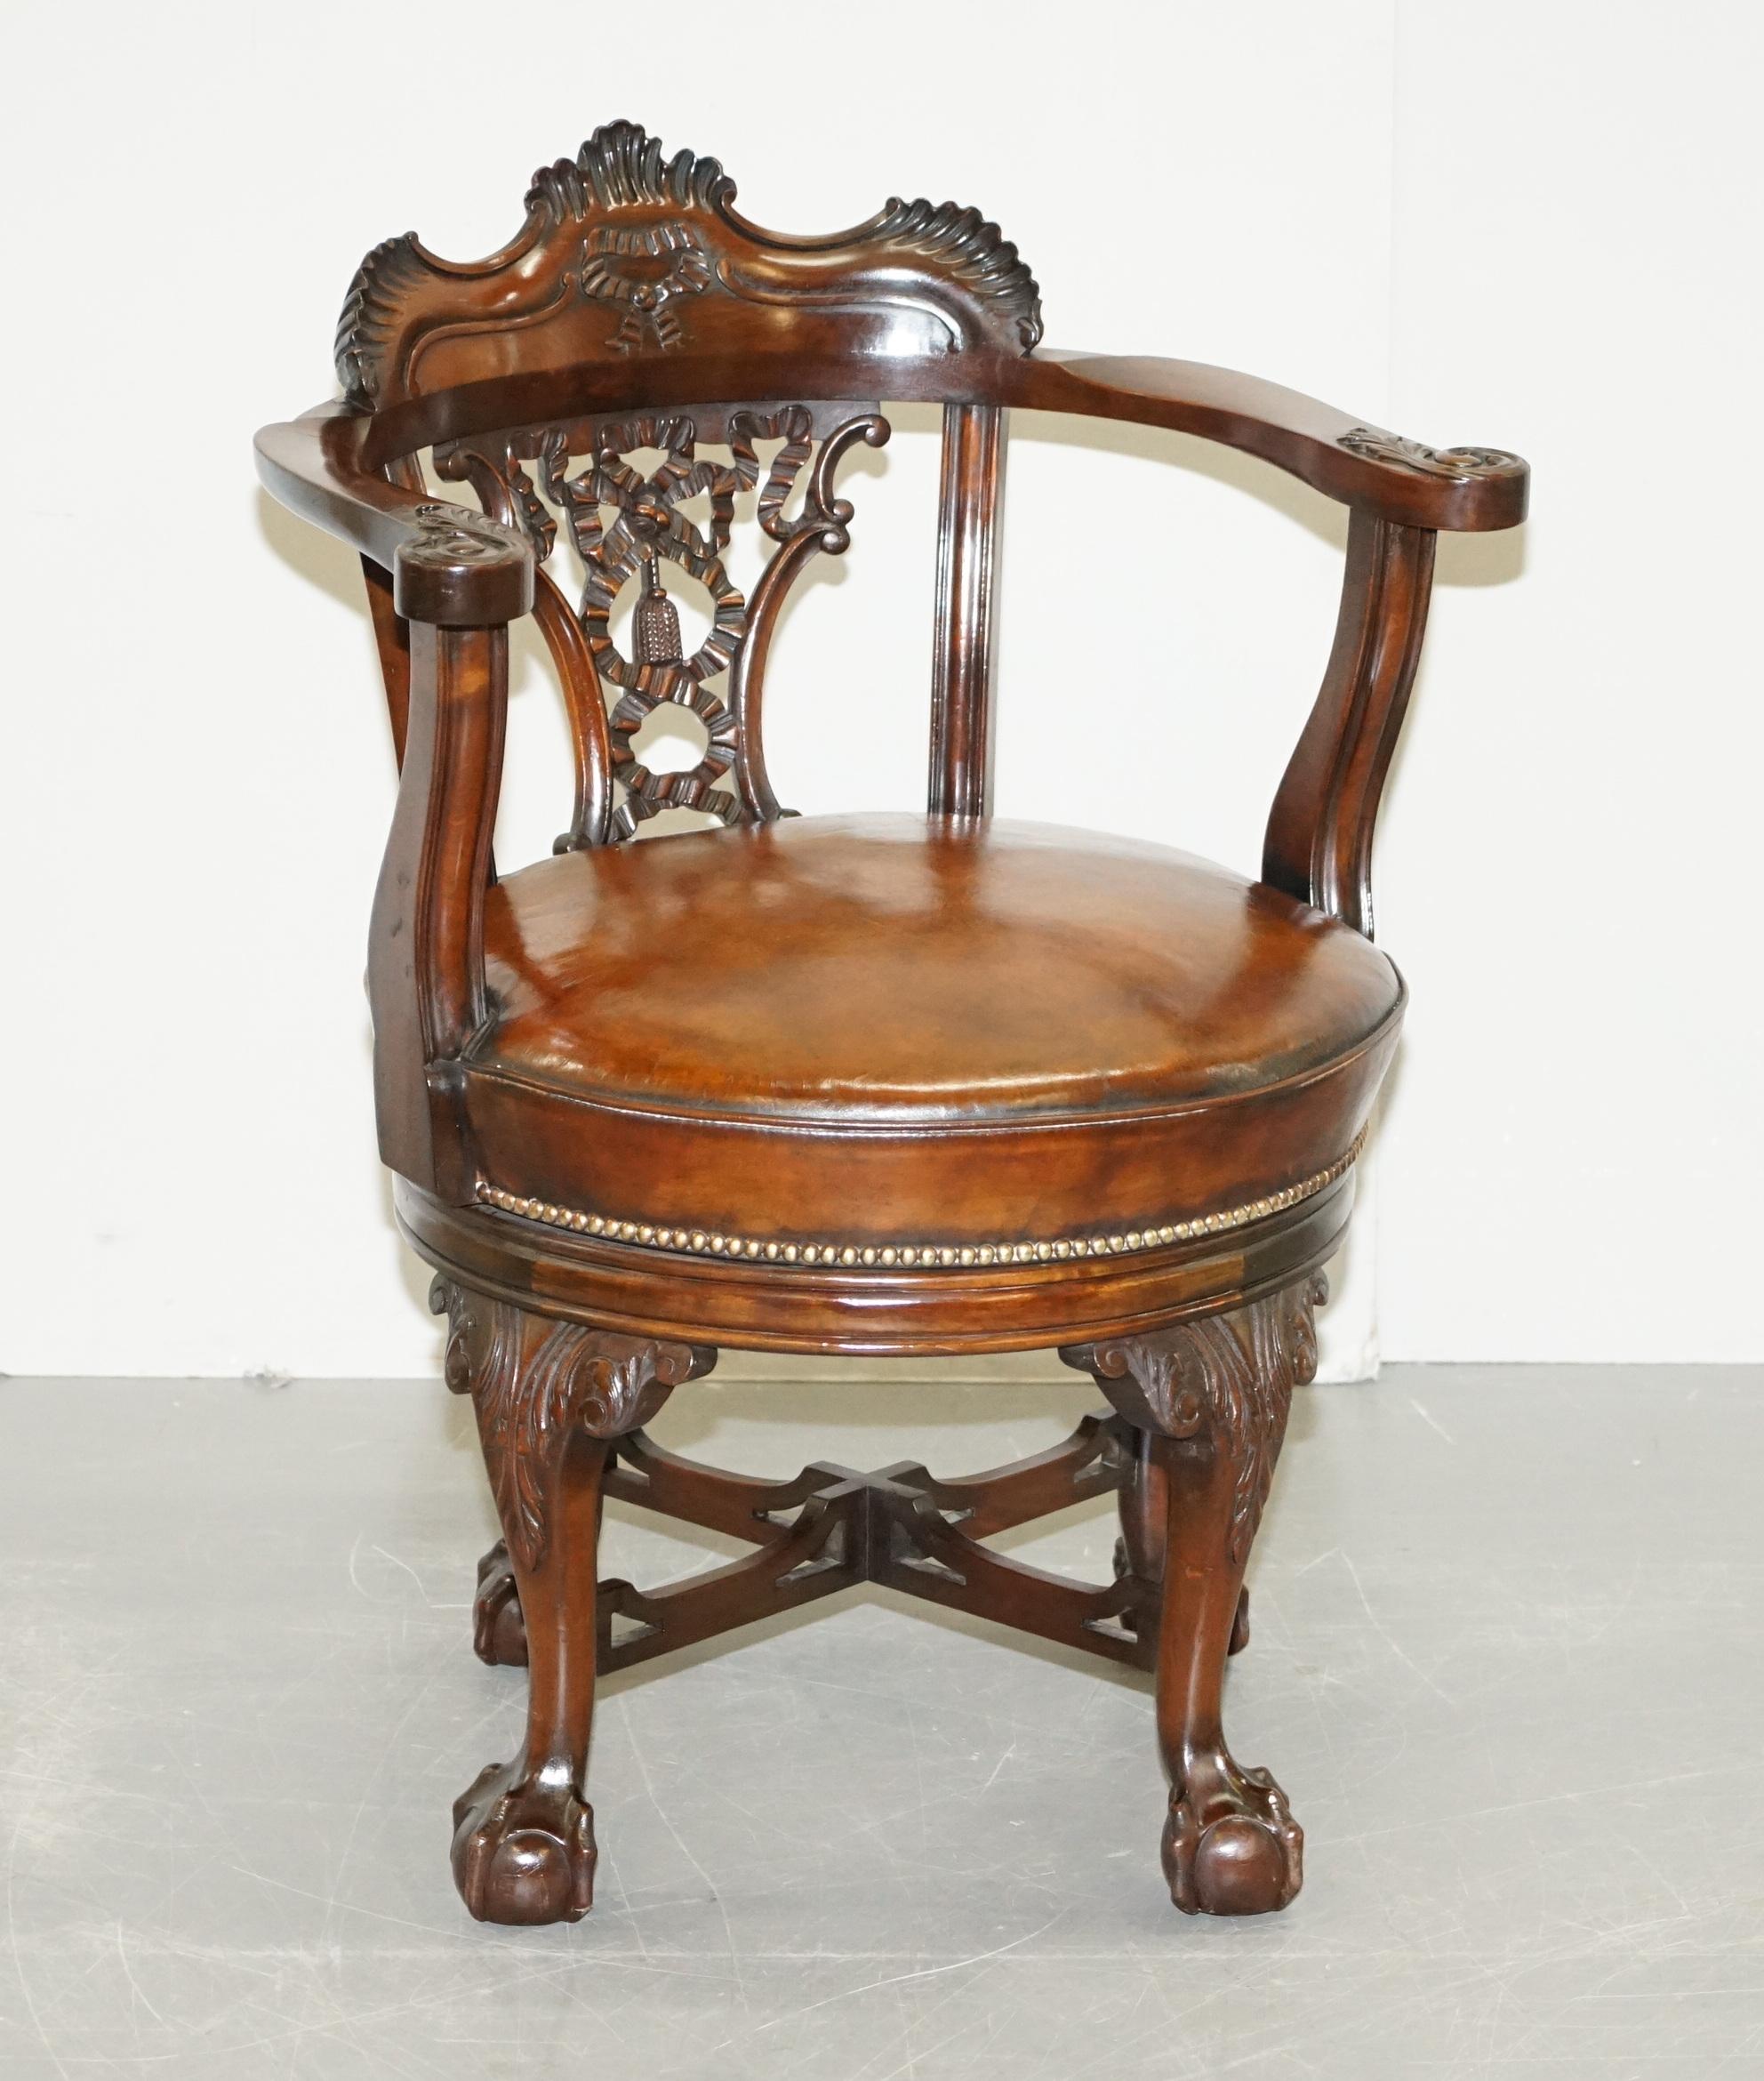 We are delighted to offer for sale this absolutely exquisite fully restored Thomas Chippendale style circa 1860 hand carved Victorian swivel armchair with oversized claw and ball feet and new hand dyed brown leather base

This chair is a real